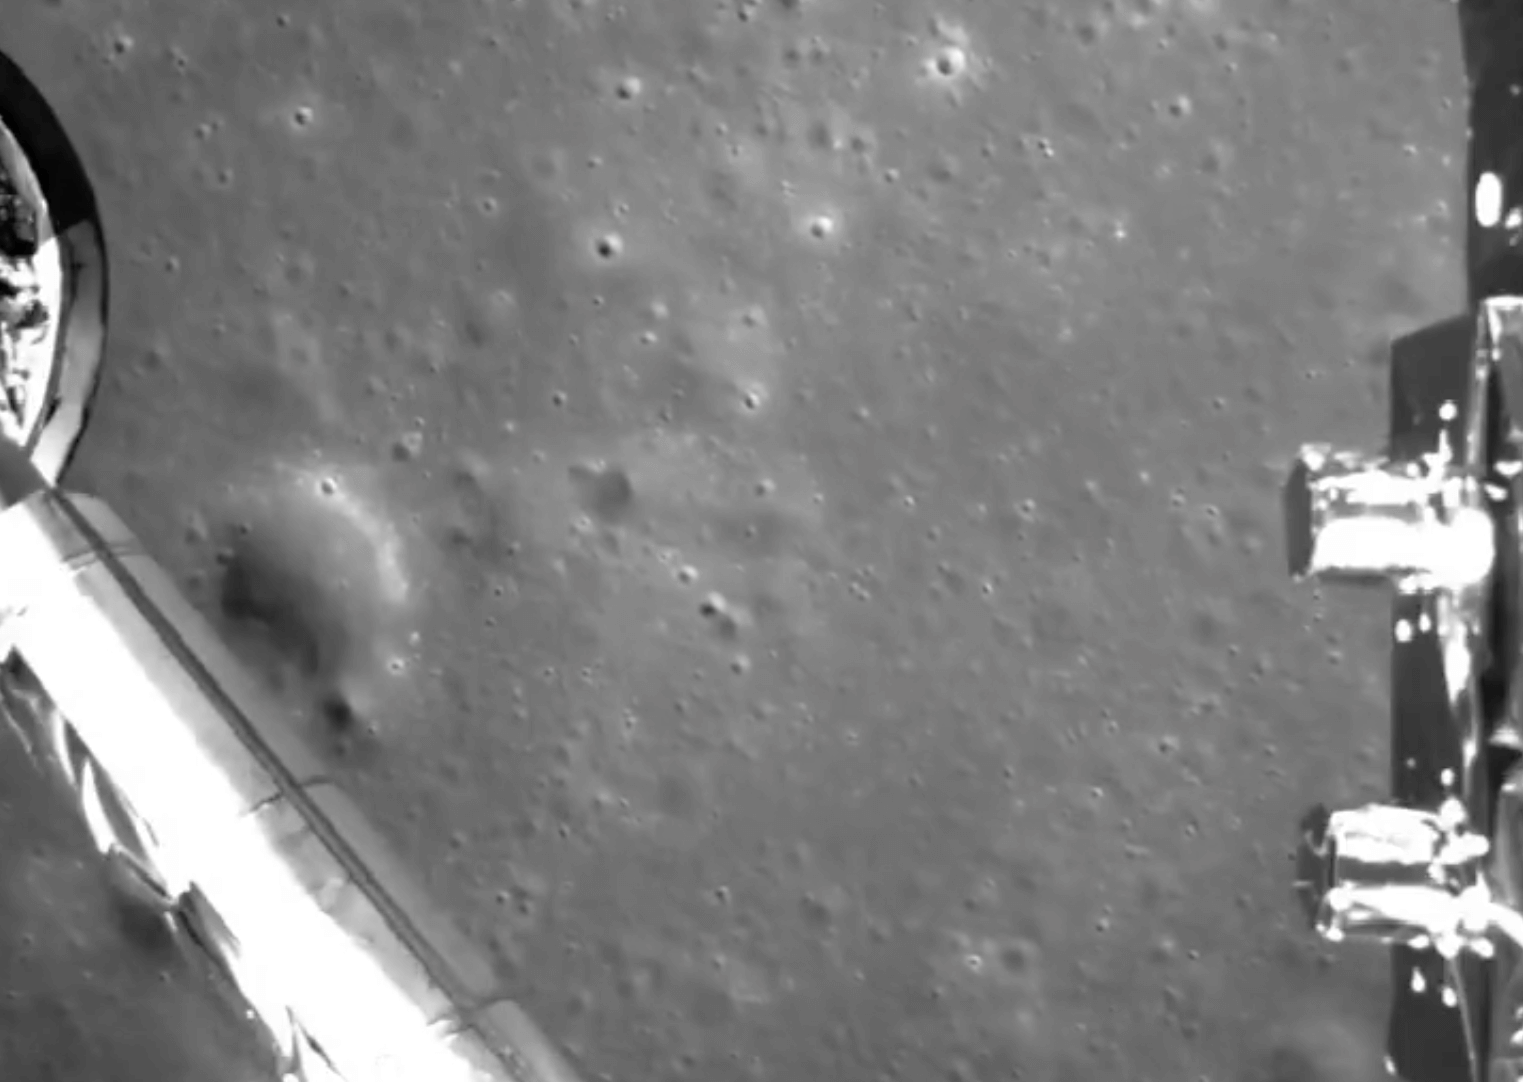 #video of the day: Landing of the Chinese module on the back side of the moon